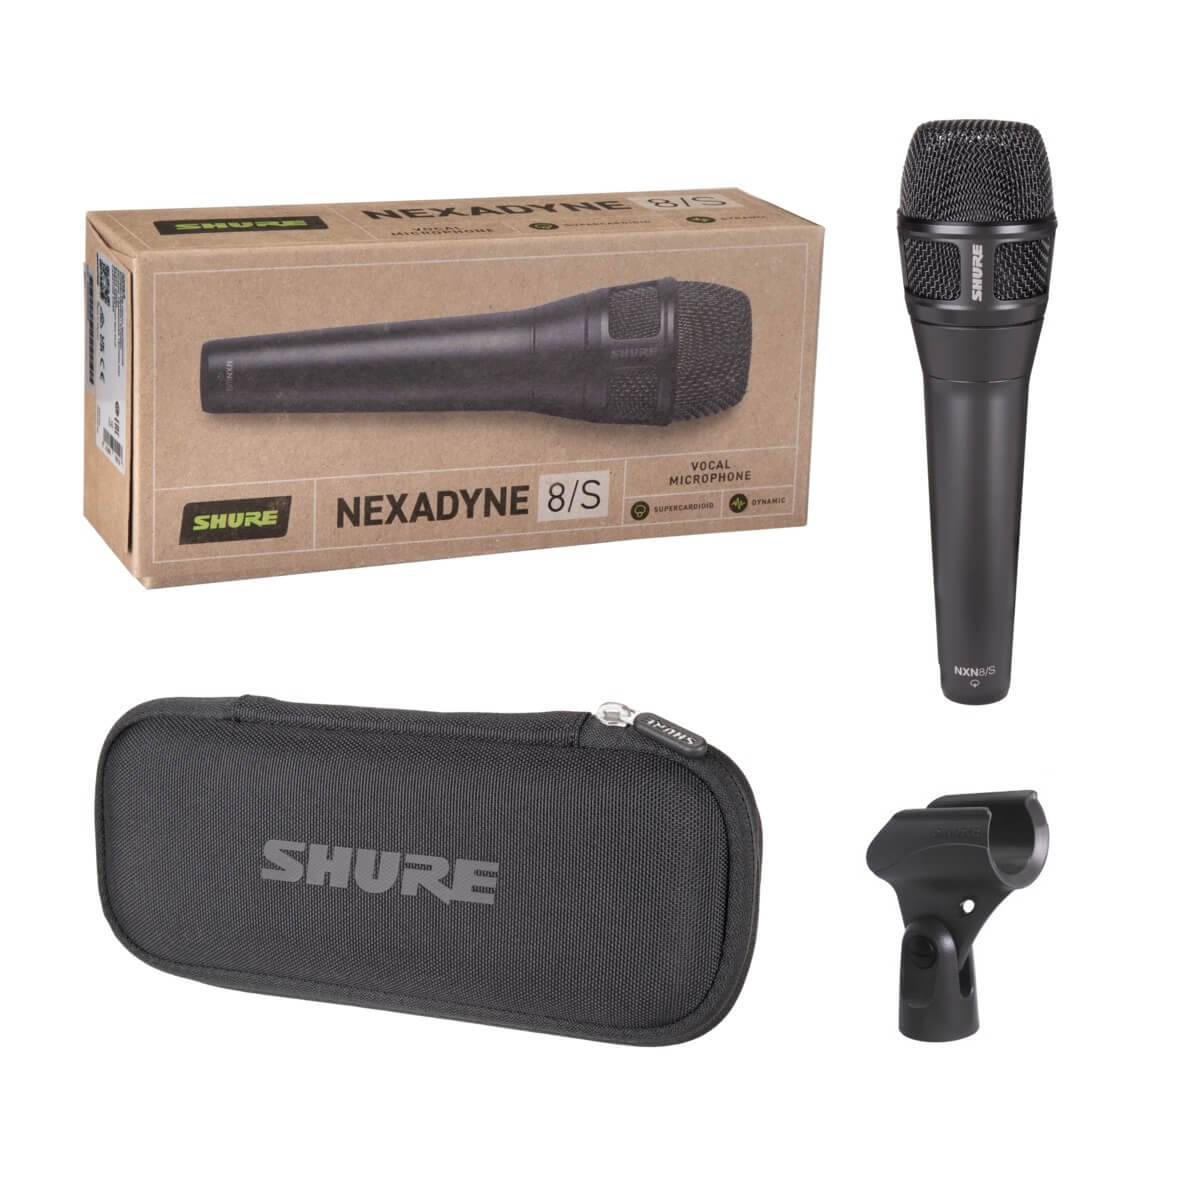 Shure Nexadyne 8/S - Supercardioid Dynamic Vocal Microphone, includes case and mic clip